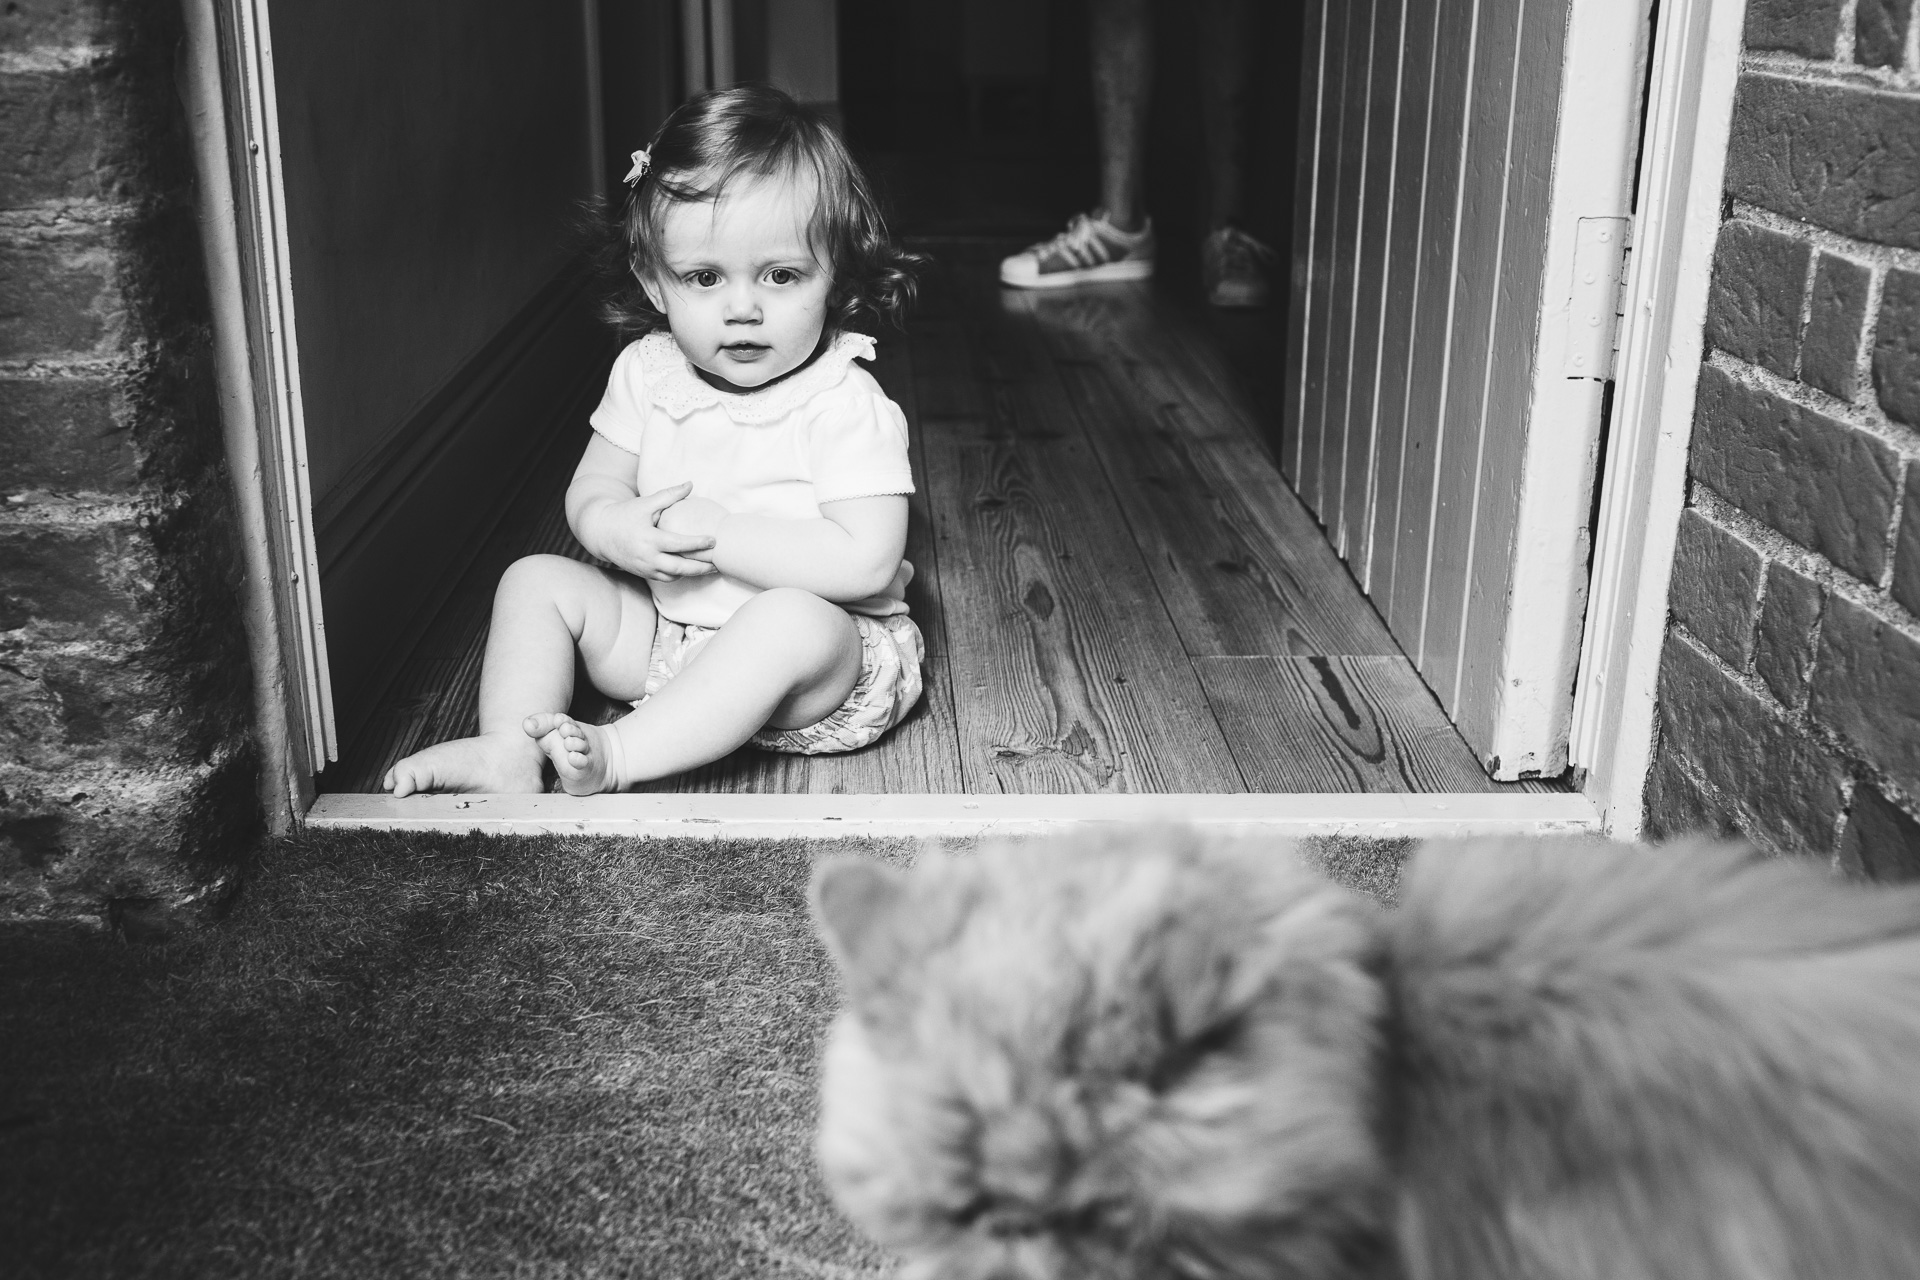 A young girl staring at a cat